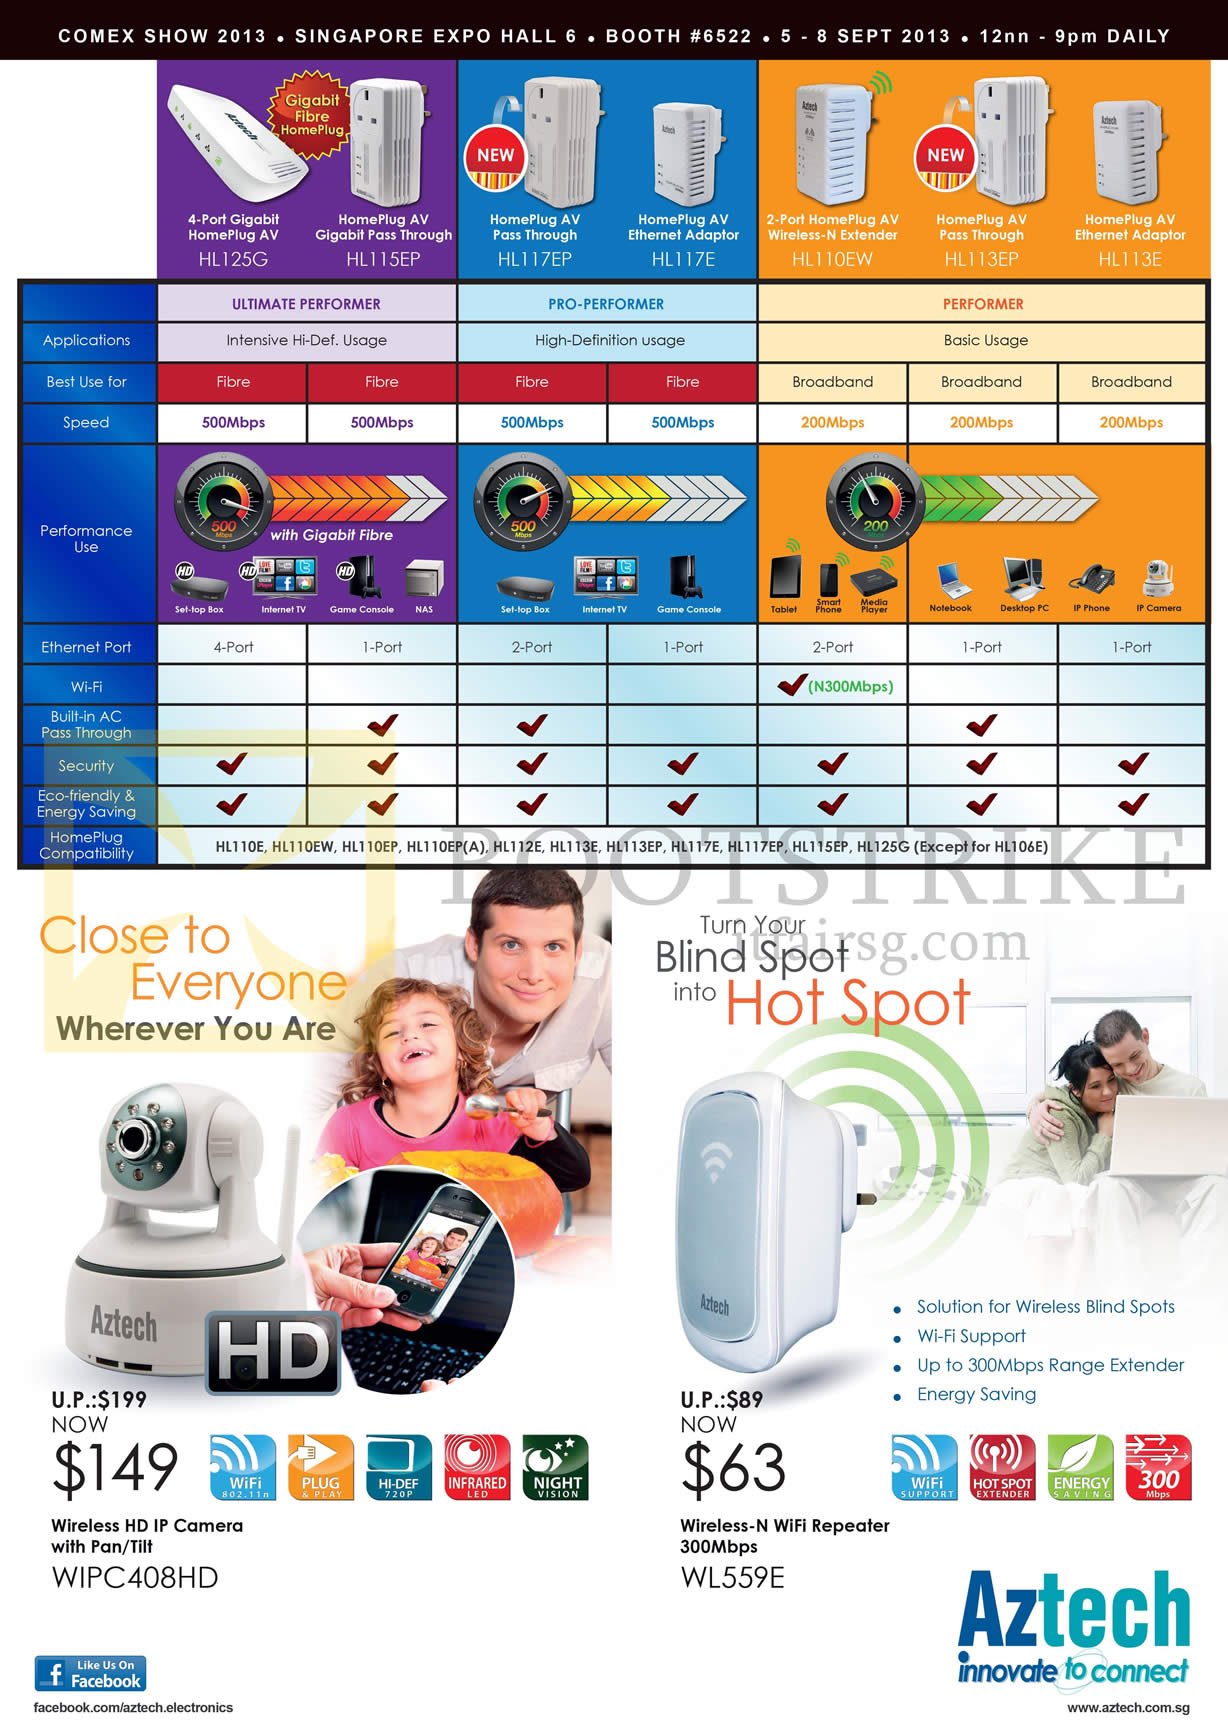 COMEX 2013 price list image brochure of Aztech Networking HomePlug Features Comparison Table, IPCam WIPC408HD, Wireless Repeater WL559E